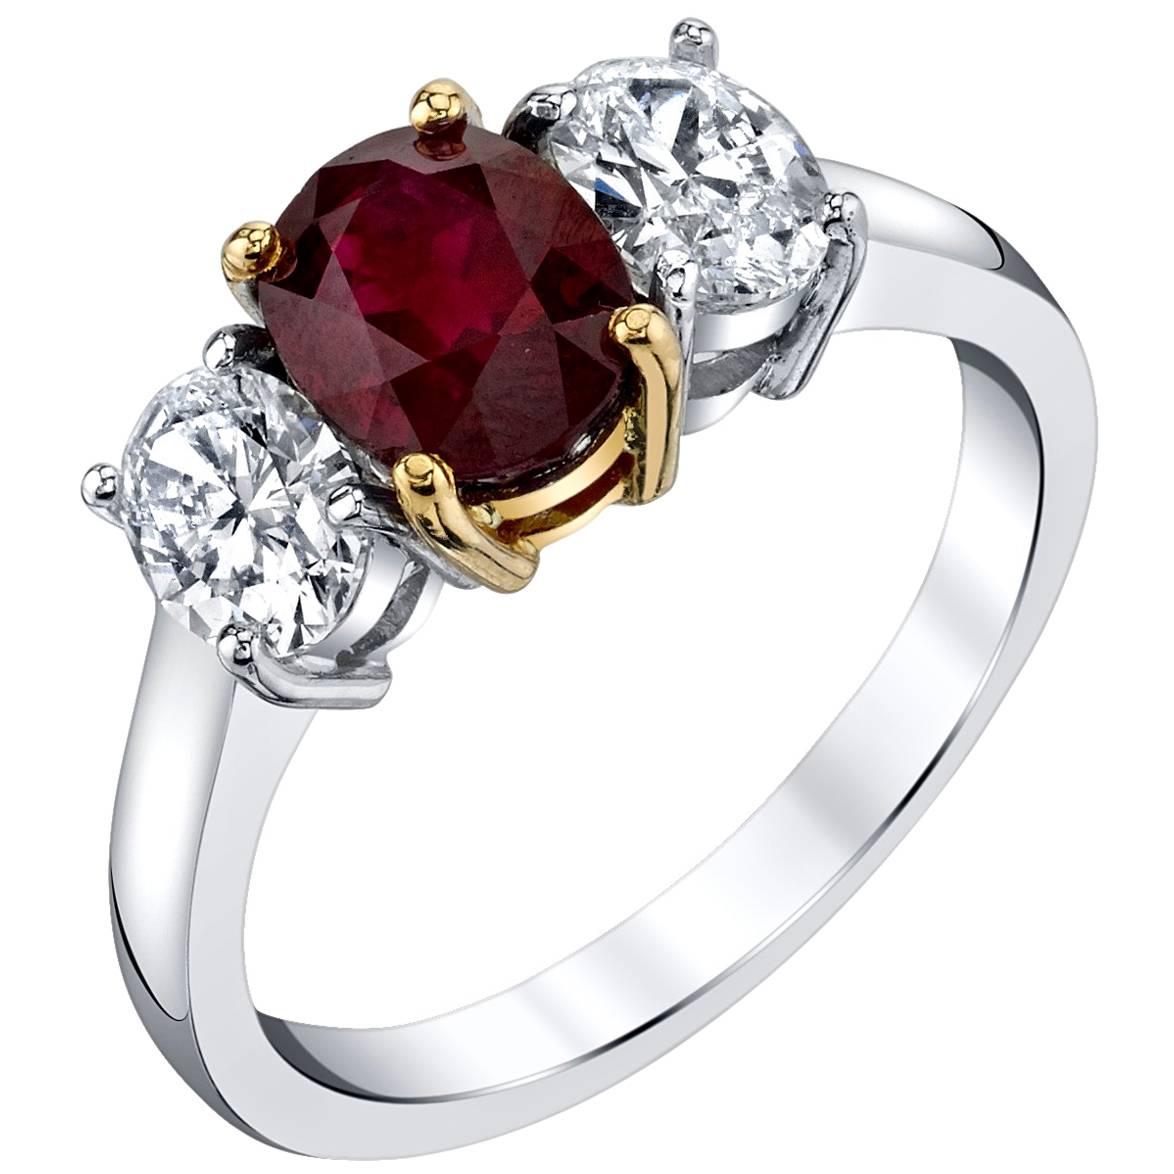 1.68 Carat Burmese Ruby and Diamond 3-Stone Engagement Ring in 18k Gold